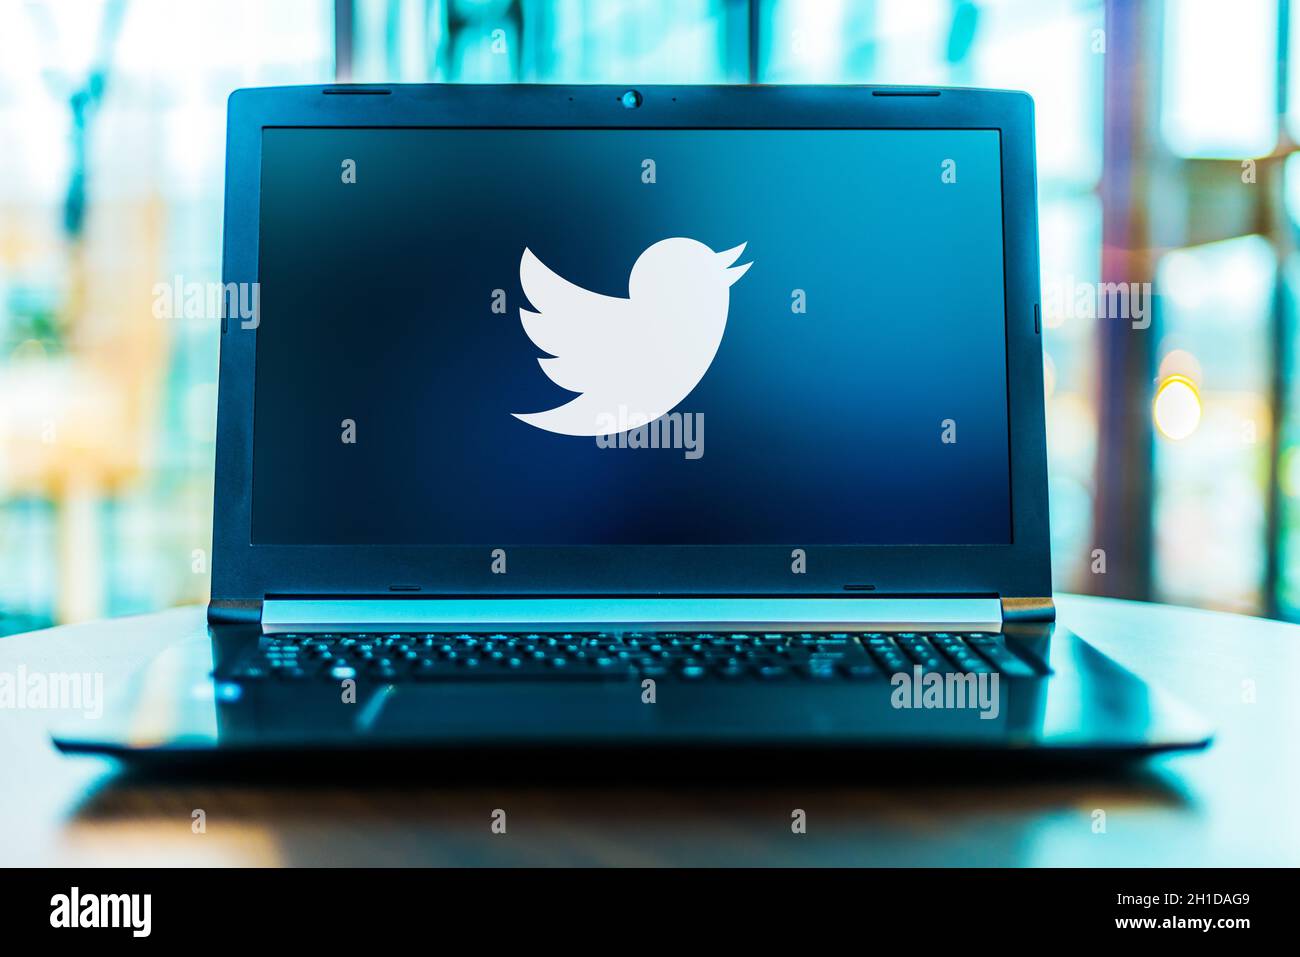 POZNAN, POL - MAR 24, 2020: Laptop computer displaying logo of Twitter, an American online microblogging and social networking service Stock Photo